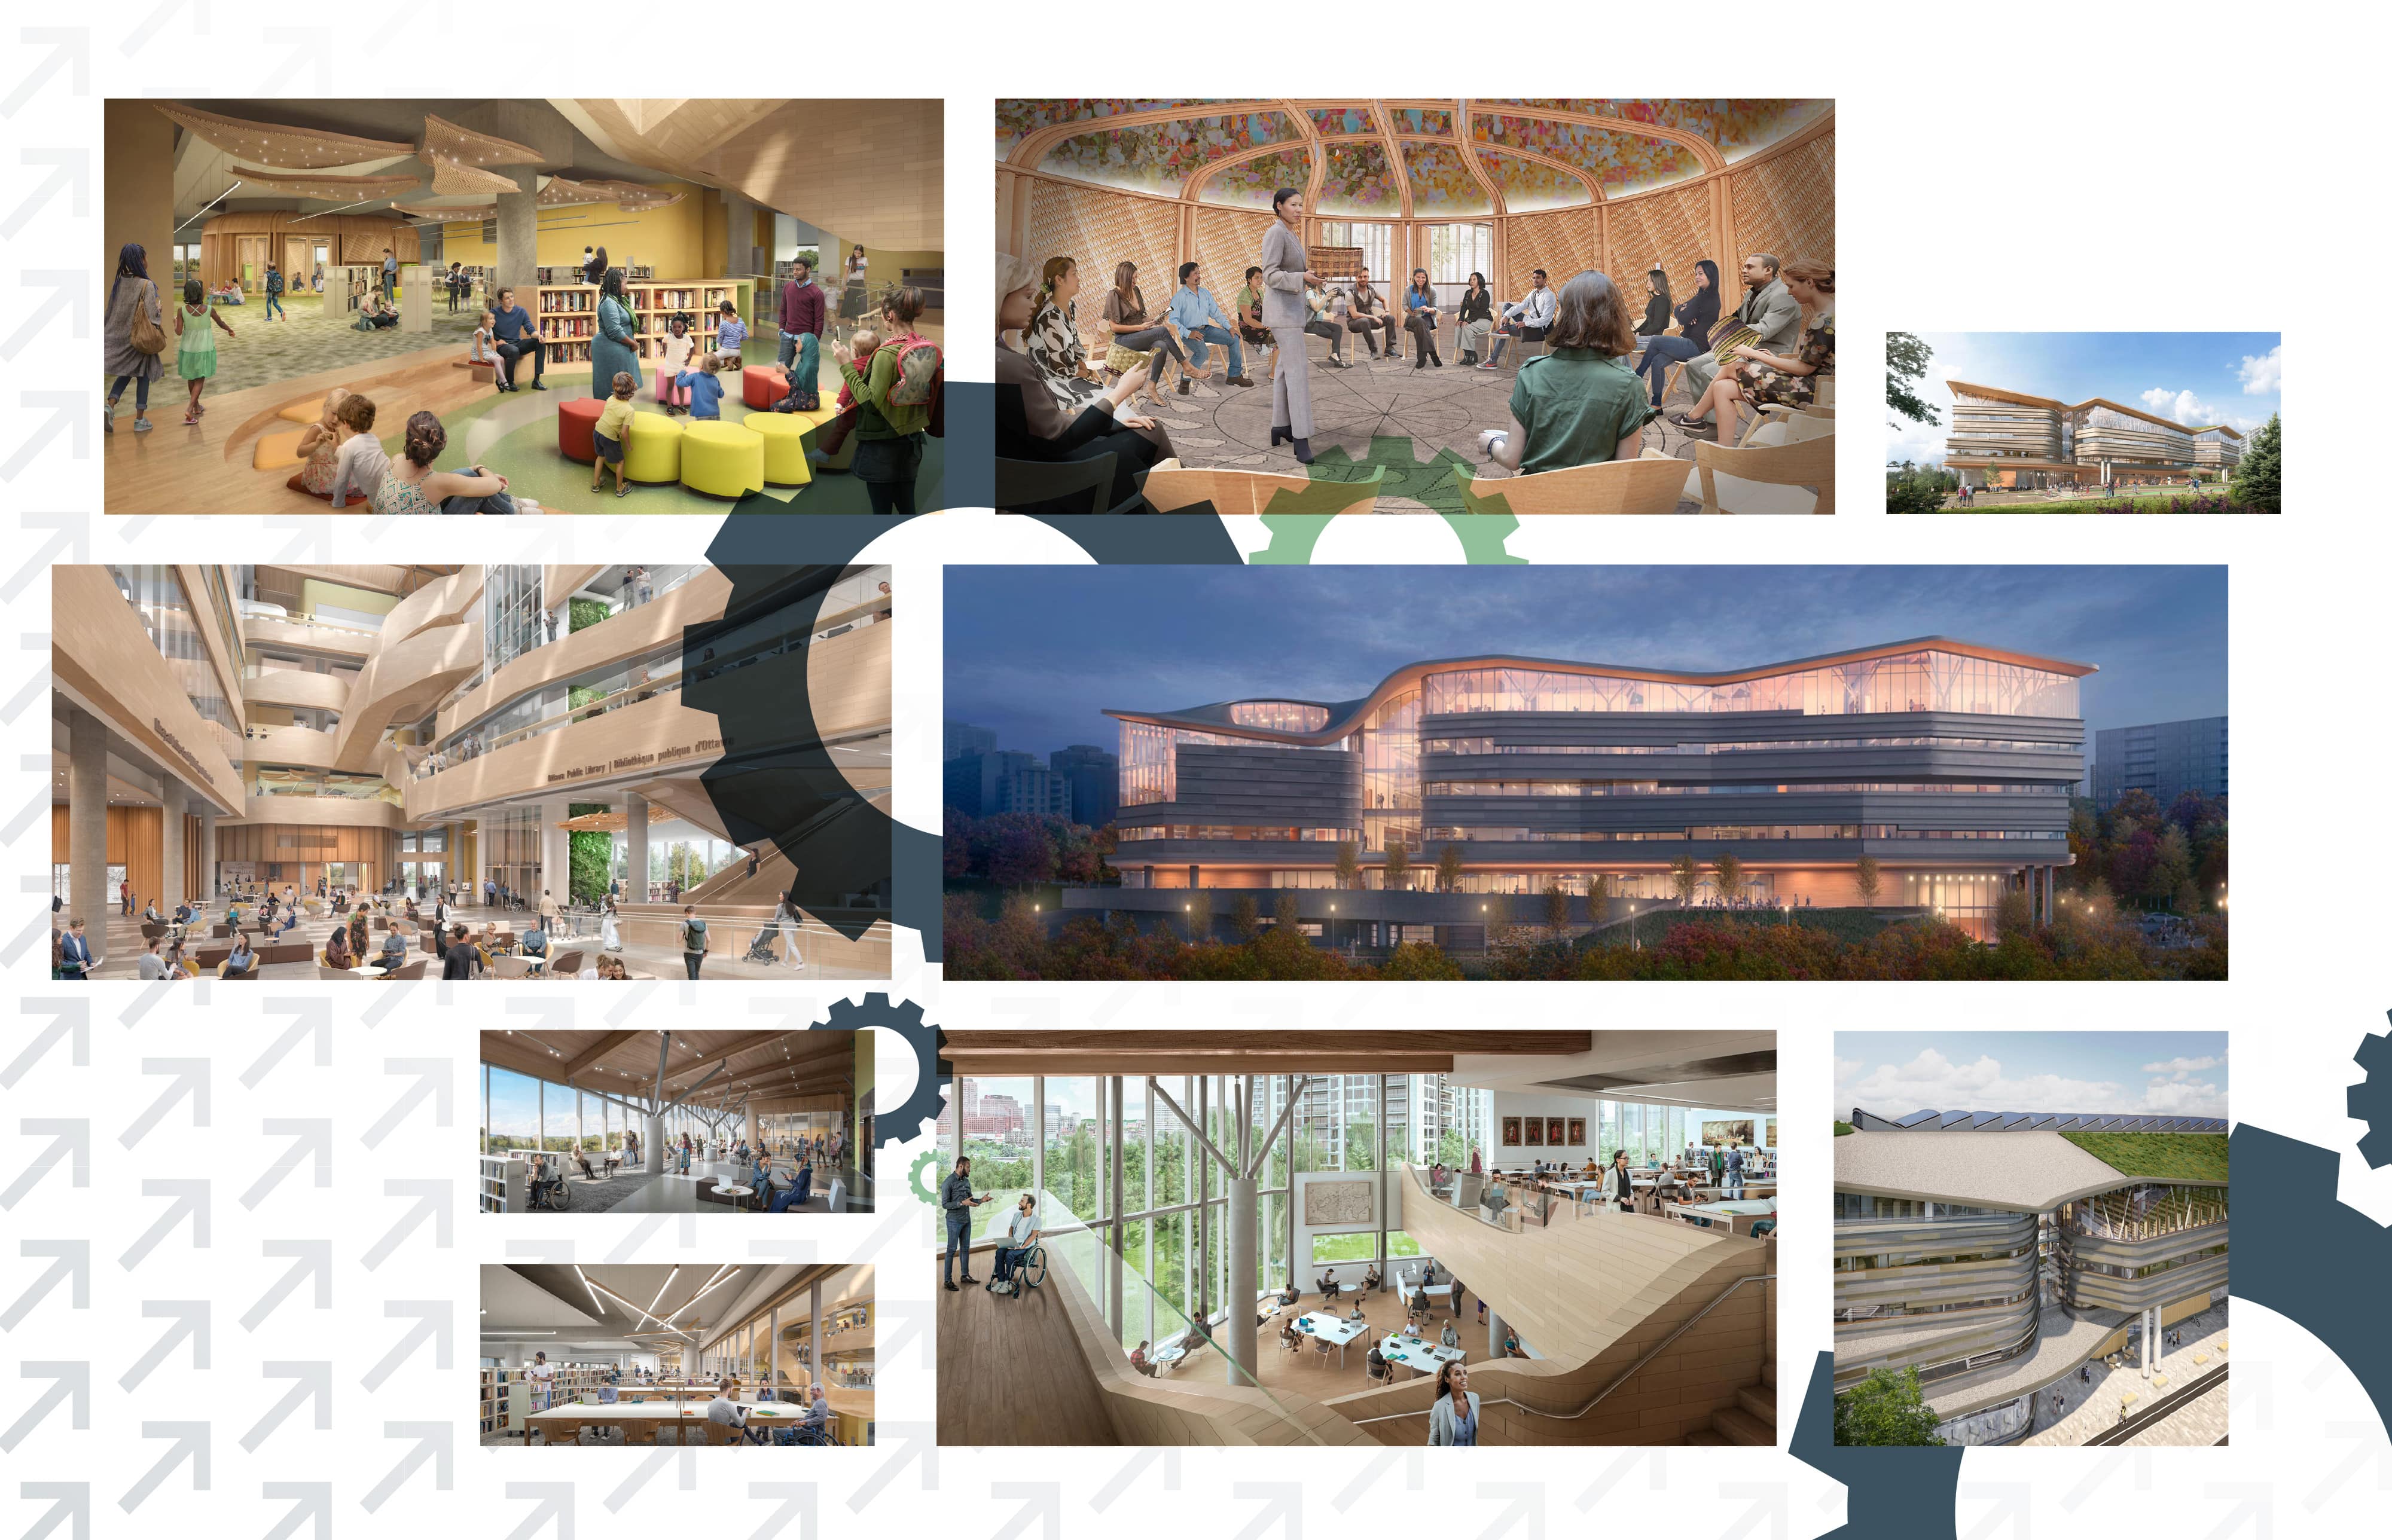 A photomontage of nine architectural renderings of Ādisōke. Photo 1: Children and their parents in the Discovery Centre. Photo 2: People on chairs meeting in circle. Photo 3: Outside of Adisōke, people are walking, biking and entering the facility. Photo 4: People are reading, having a coffee, discussing with friends and walking in the open space of Ādisōke. Photo 5: exterior view of Ādisōke from the Ottawa River on a night in the fall. Photo 6: People seating at tables are reading, discussing and taking in the fantastic views. Photo 7: People are consulting documentary resources, reading, doing research. Photo 8: People are reading, climbing the stairs, discussing and doing research. Photo 9: exterior view of the facility showing solar panels installed on the green roof.